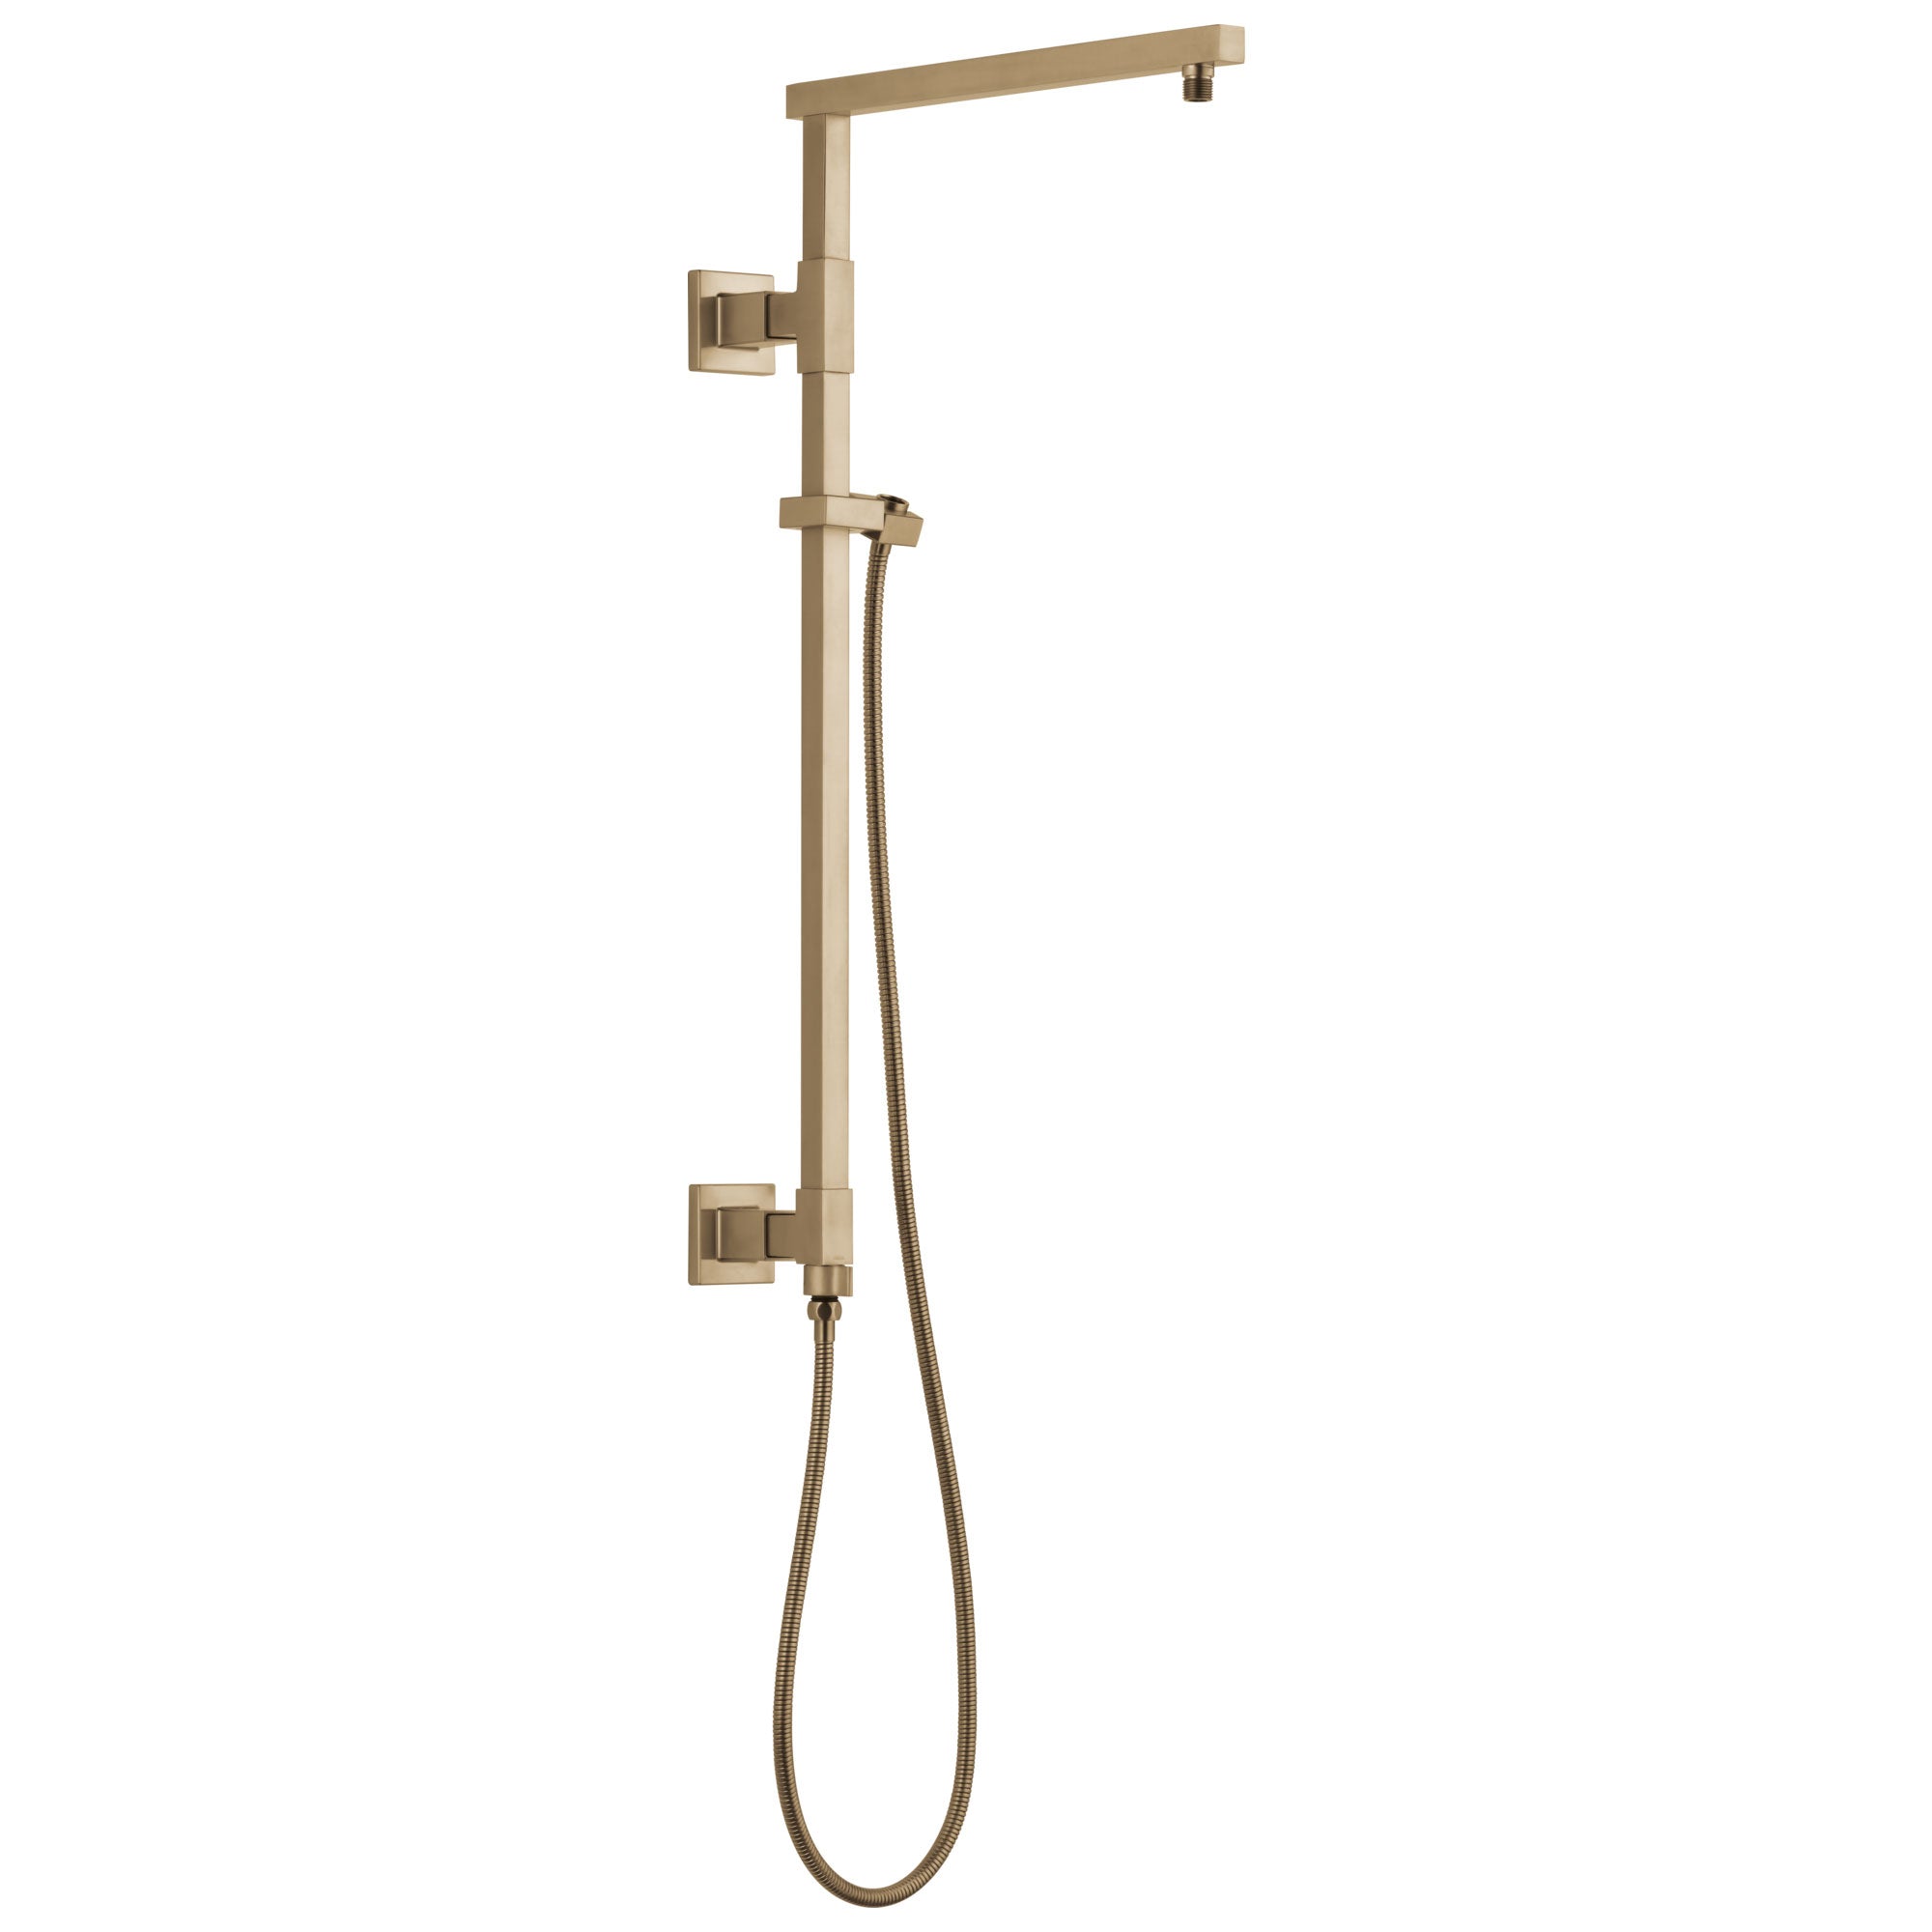 Delta Champagne Bronze Finish Emerge Modern Angular Square Shower Column 26" (Requires Showerhead, Hand Spray, and Control) D58420CZ